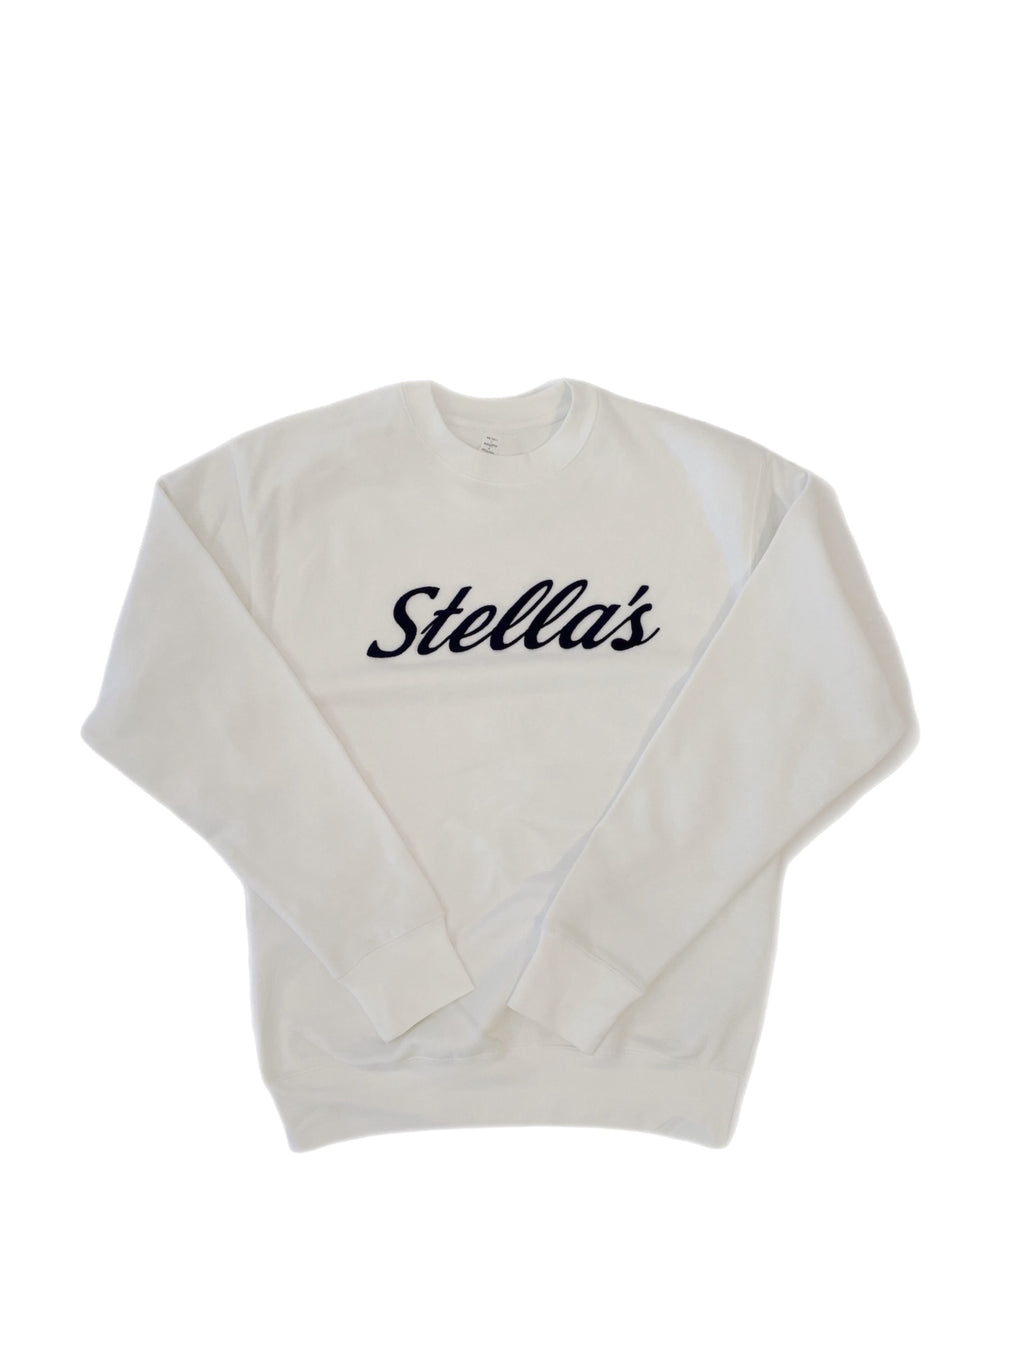 Stella's Embroidered Crewneck Sweatshirt White with Navy Embroidery